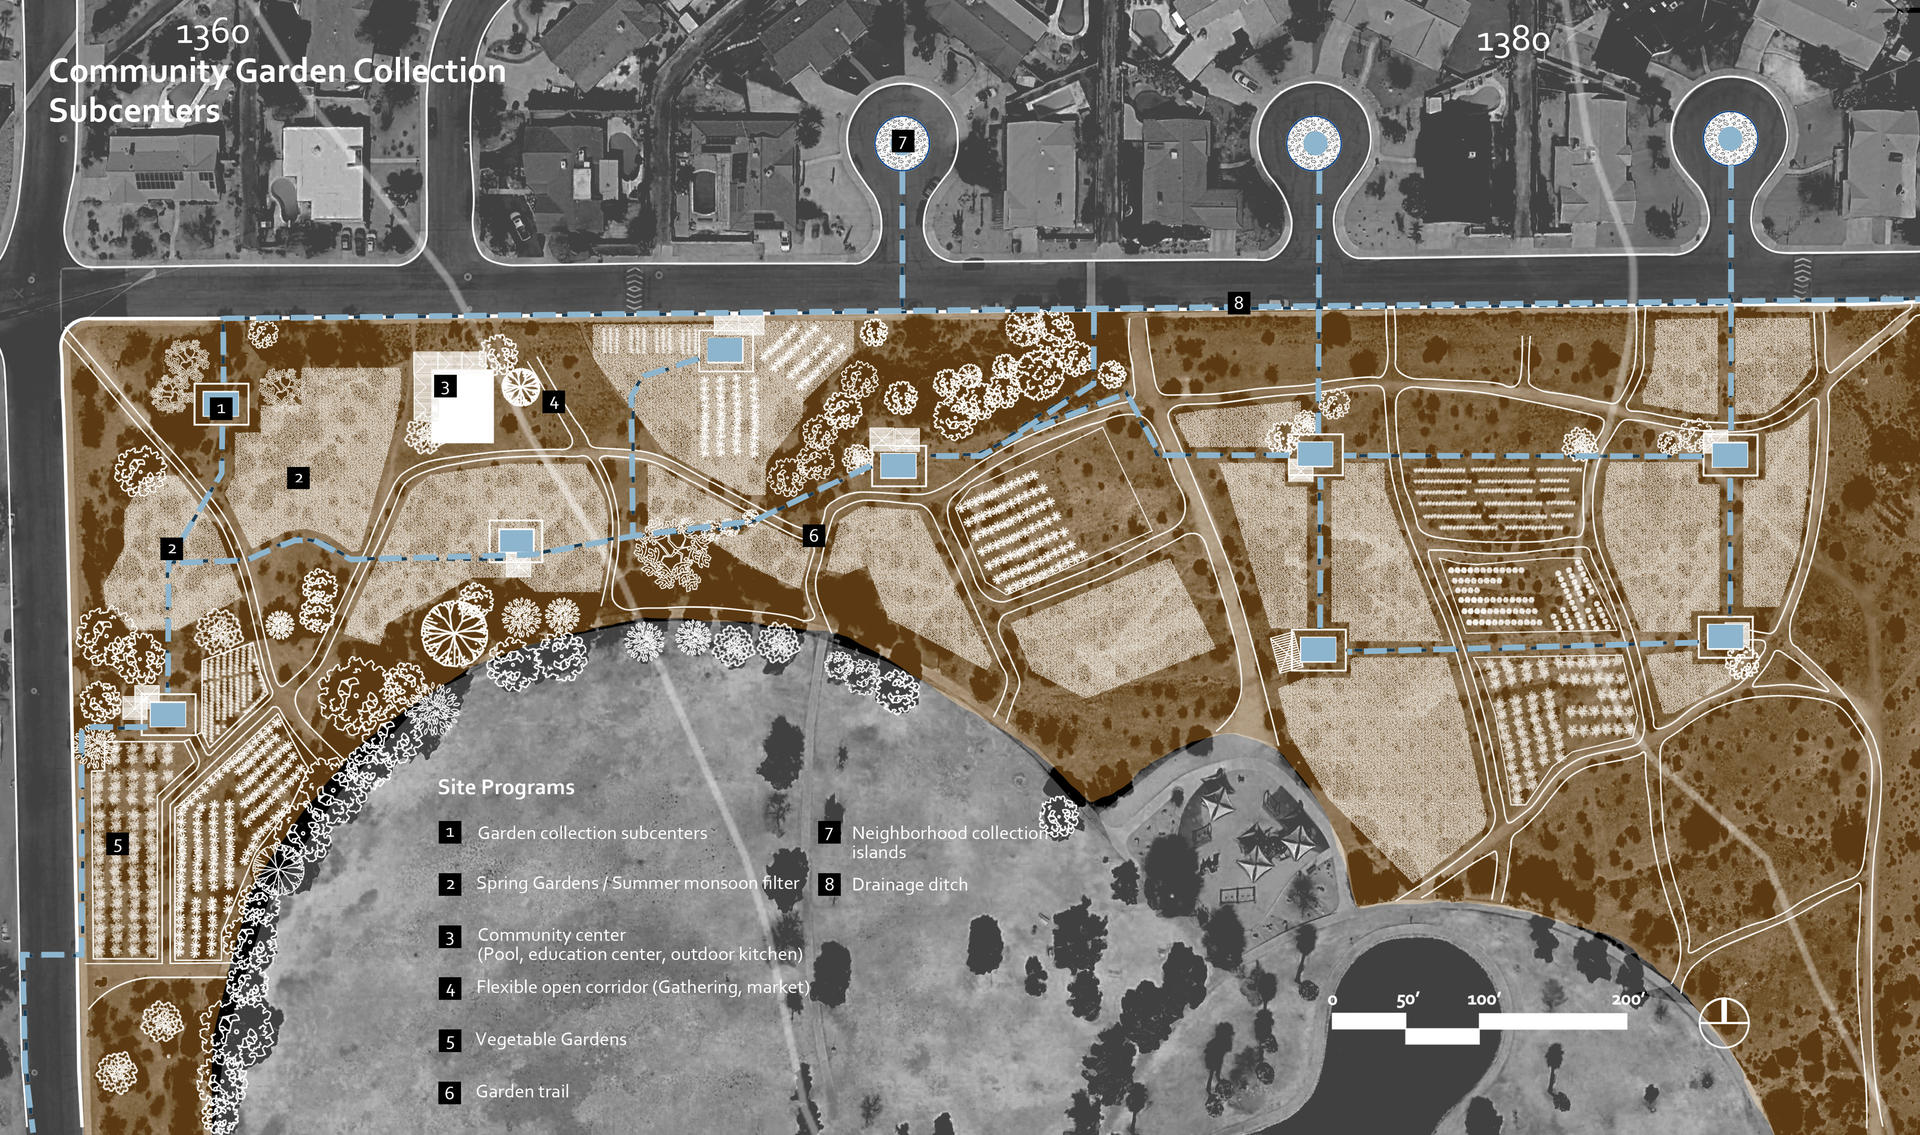 Zoom-in plan view of the whole community garden and community center layout